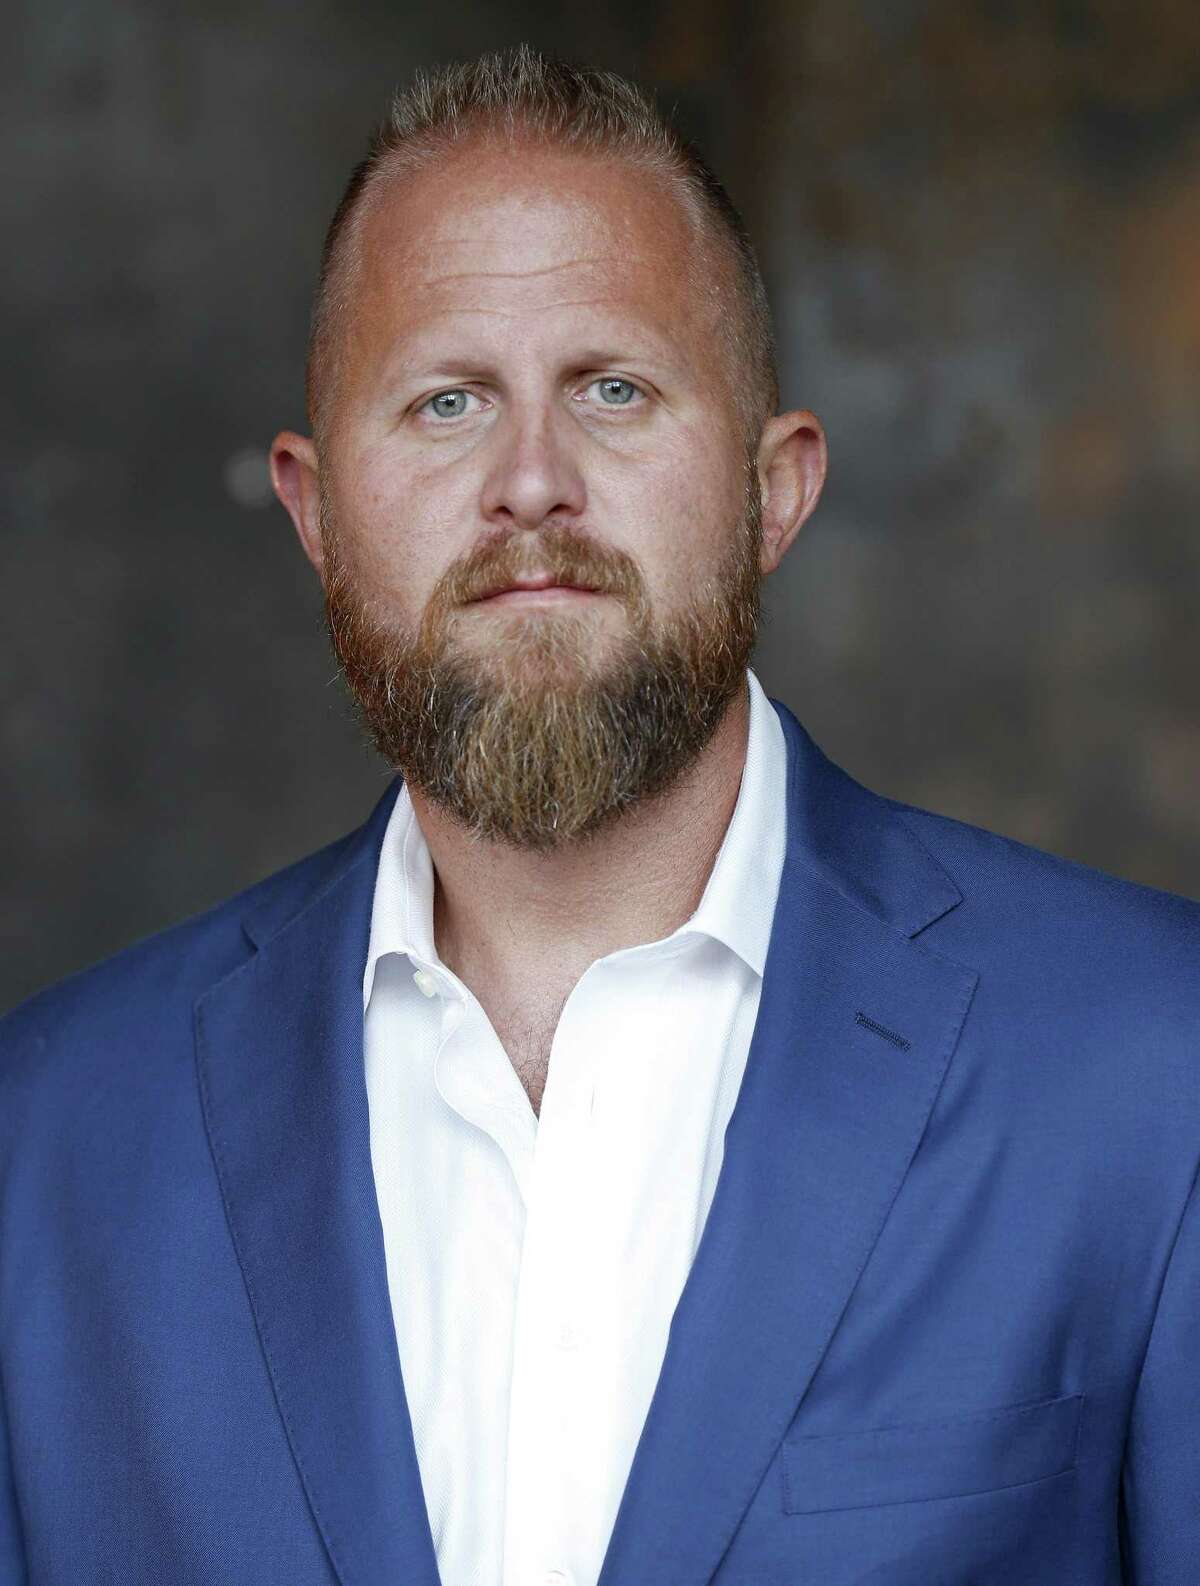 As the Trump campaign’s digital director, Parscale ran Trump’s social media and online advertising operations out of San Antonio. His work has been widely credited with helping Trump win in 2016.